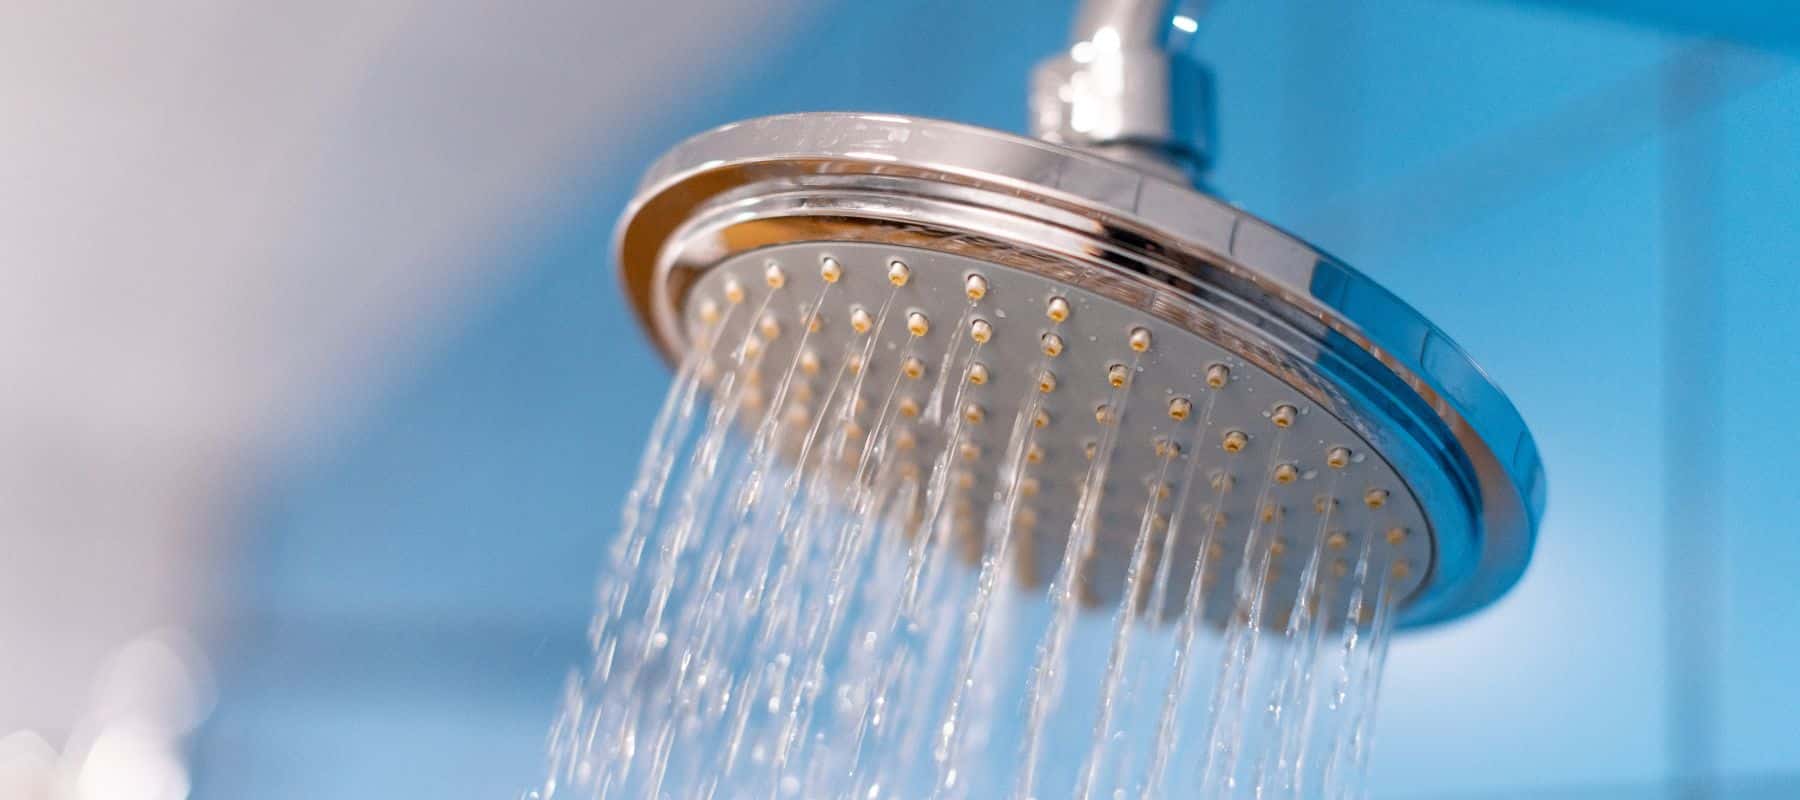 close up of a shower head on the highest setting